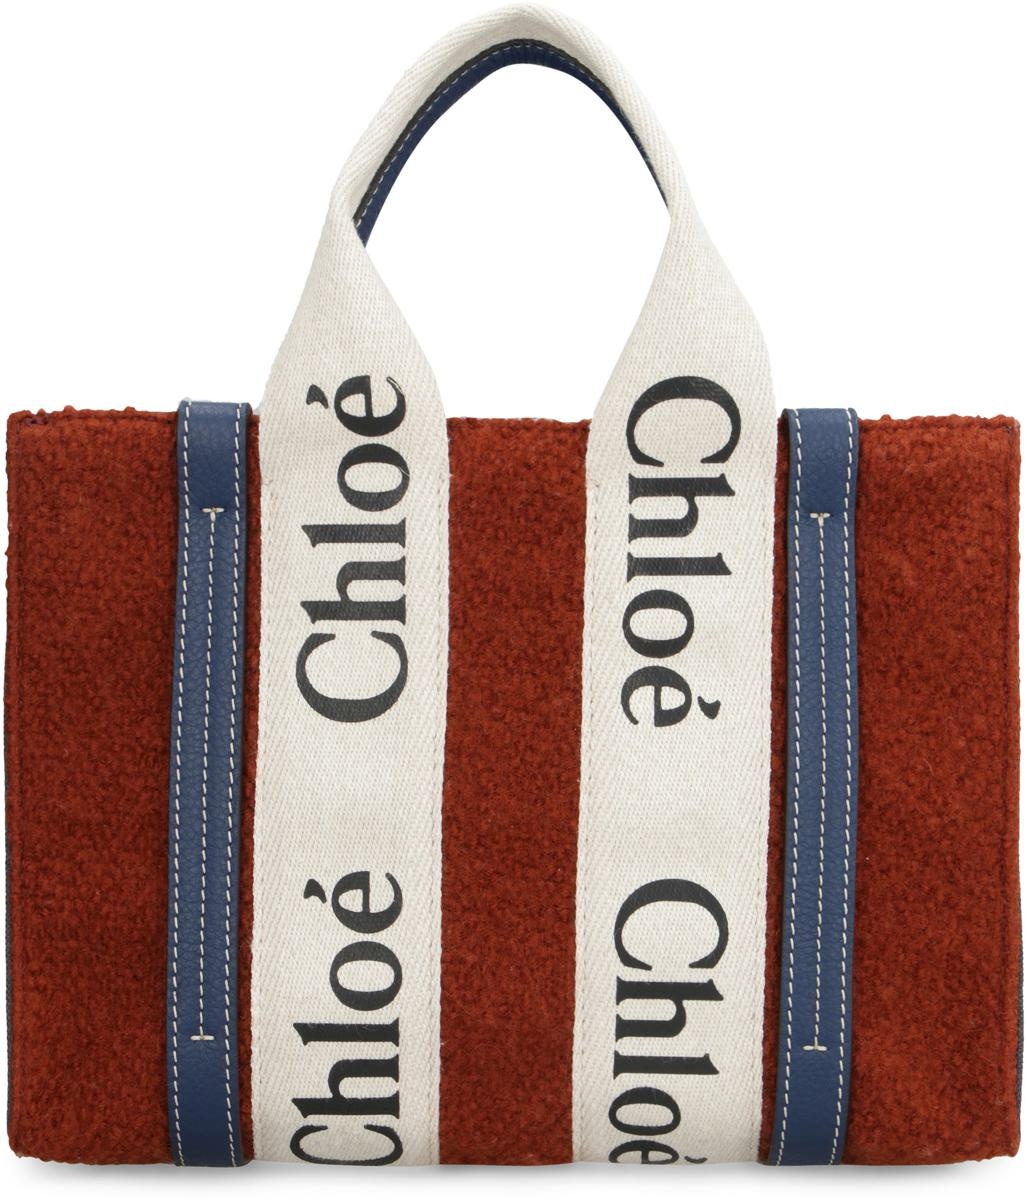 CHLOÉ WOODY SMALL TOTE WOOL - 4